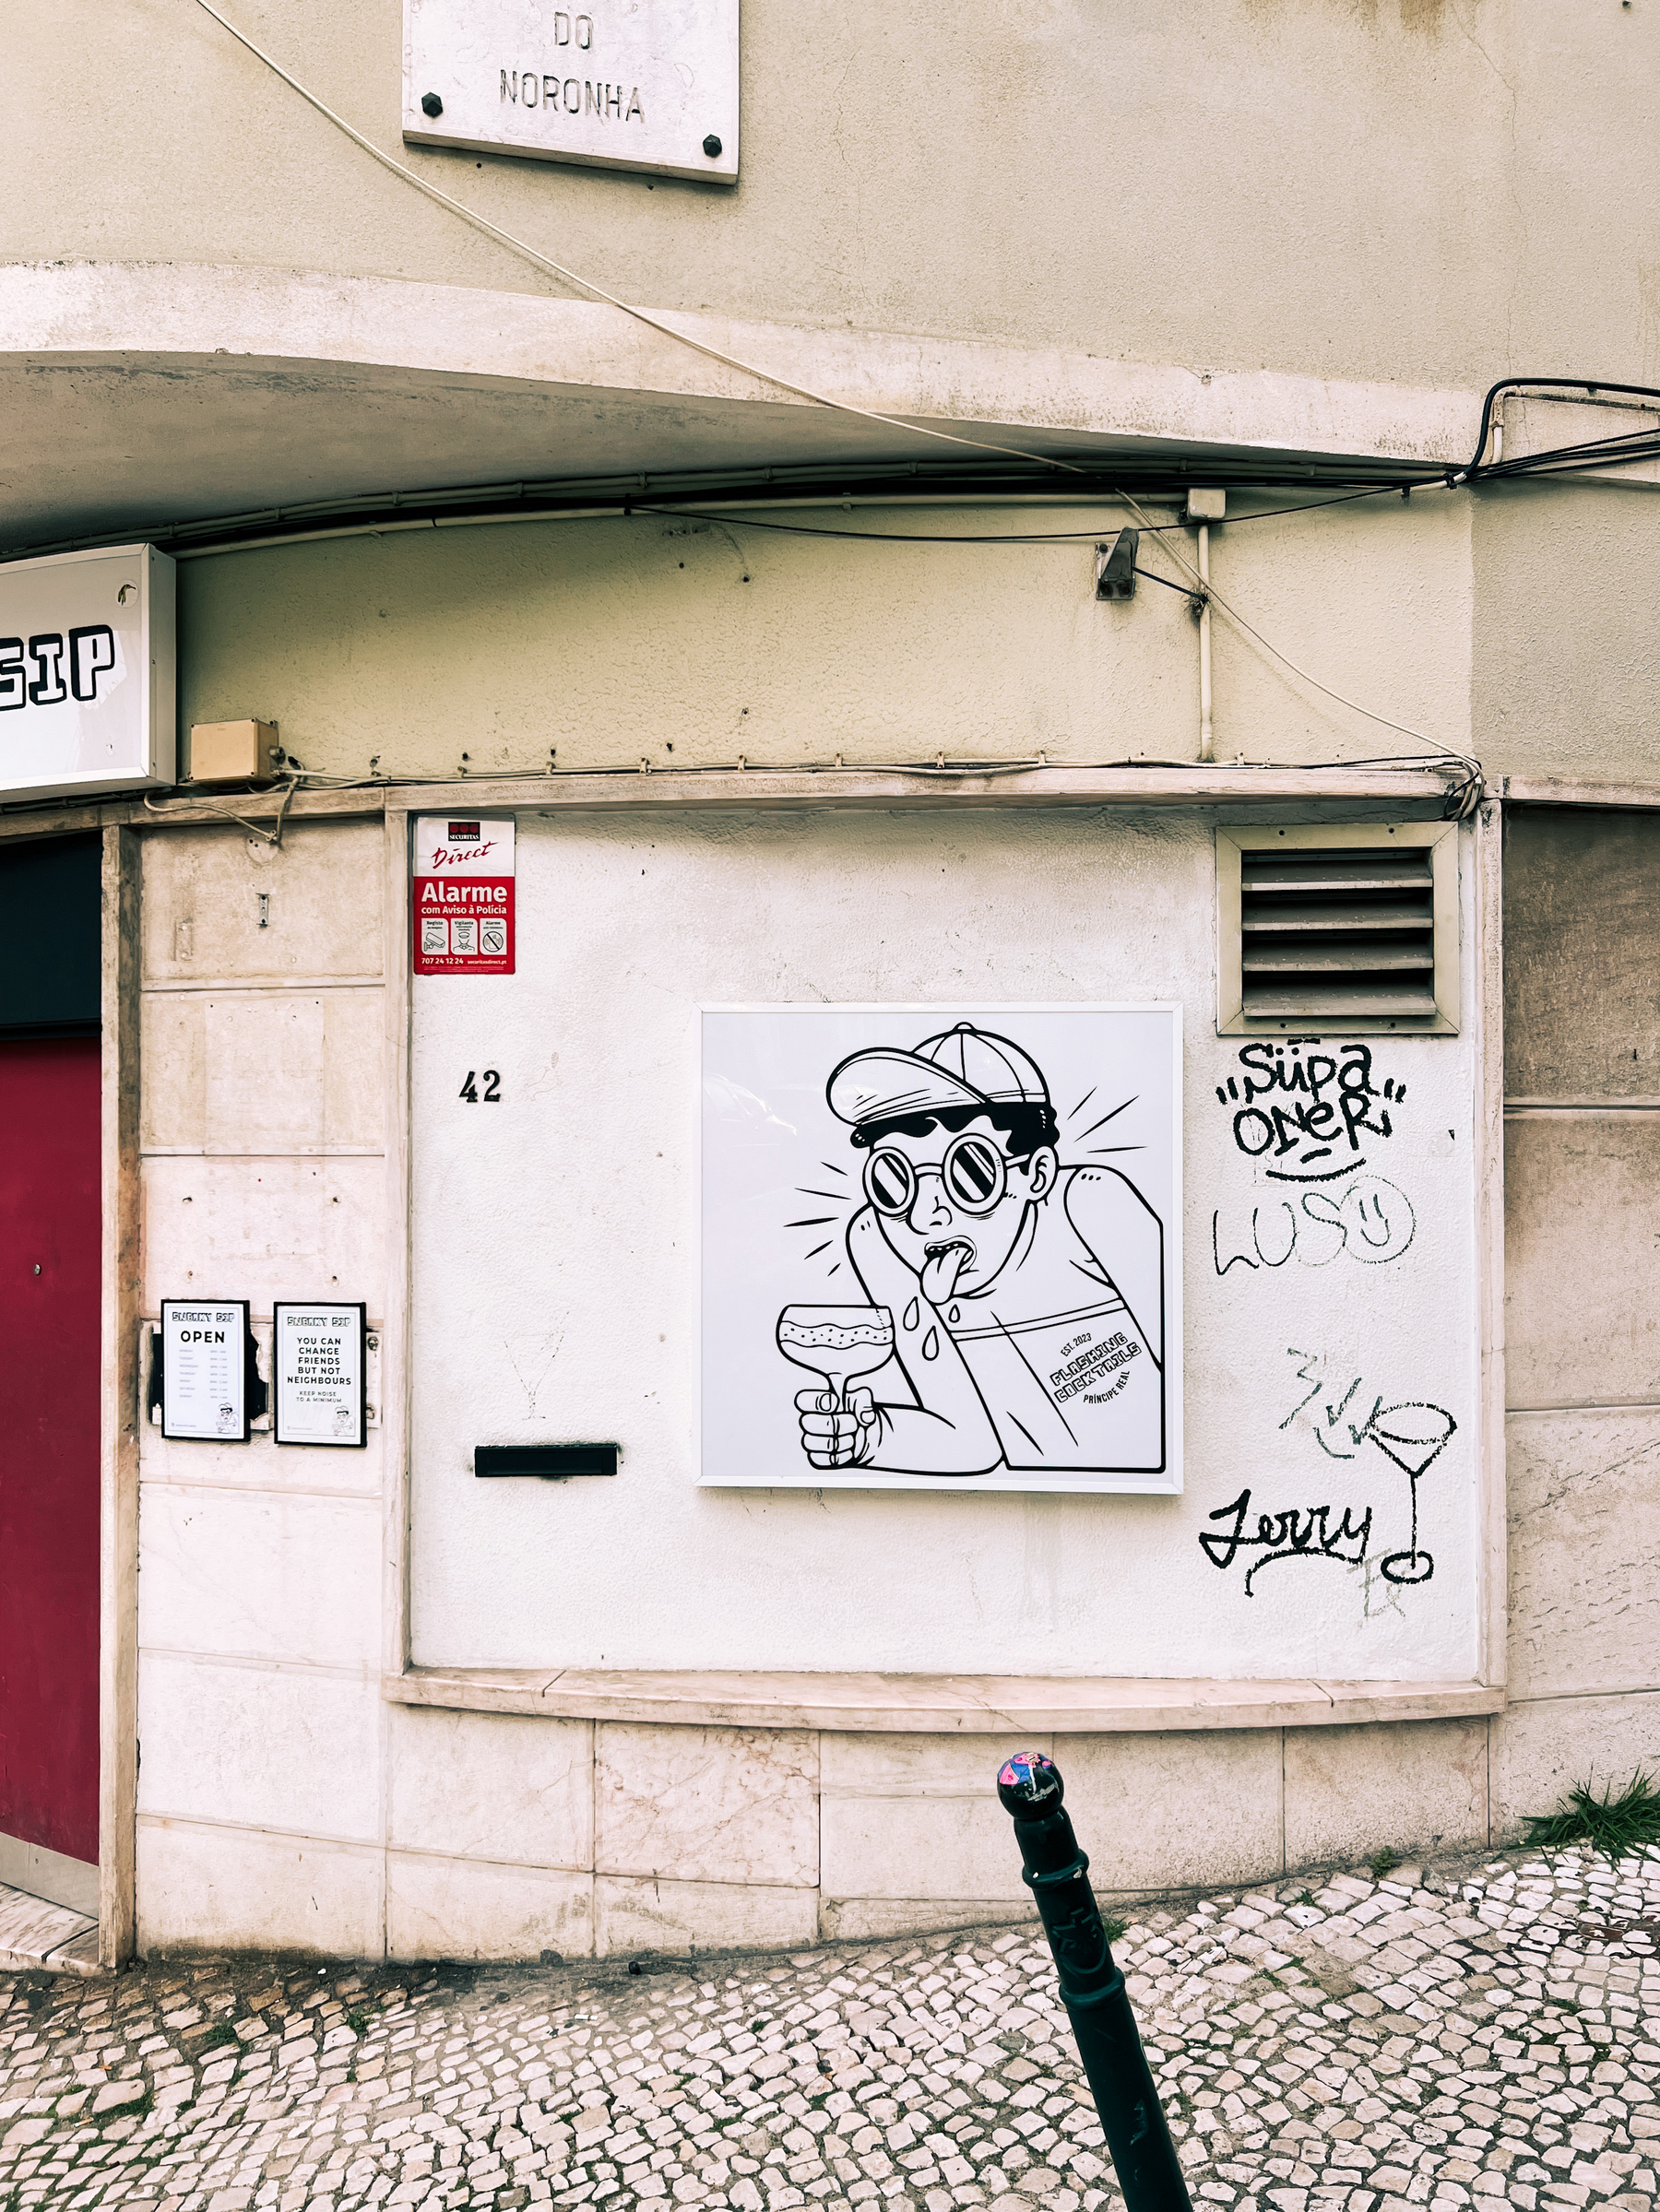 A street corner with a cartoon-style graffiti artwork on a wall, featuring a character wearing glasses and holding a cocktail. There are also signs, and some graffiti tags.